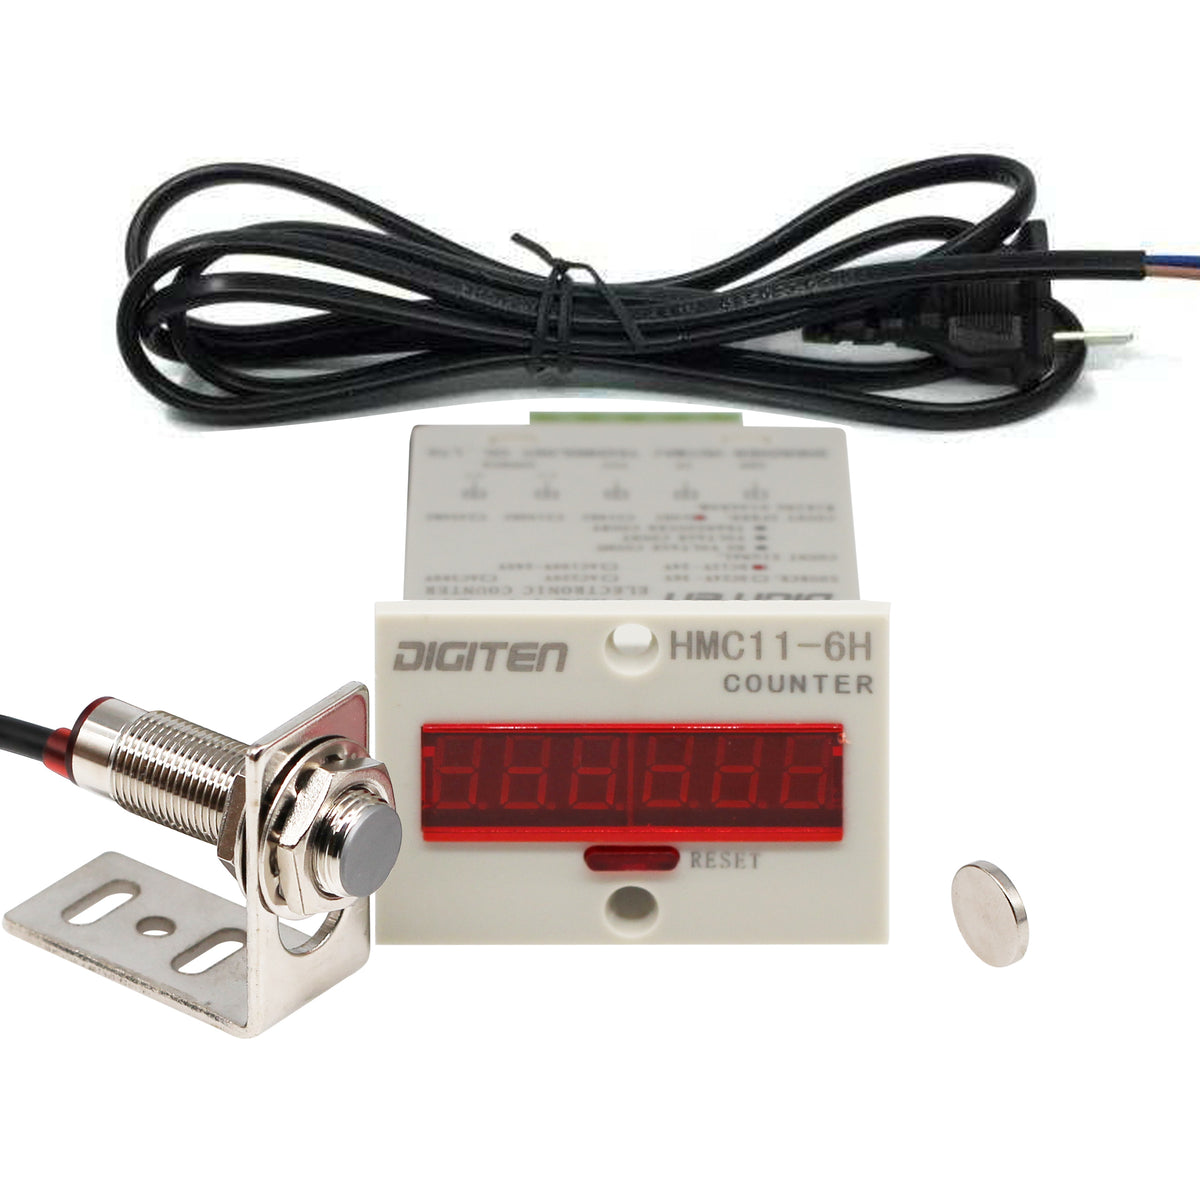 DS-48  Digital Counter with 2x4 Digit LED Display - Tense Electronics